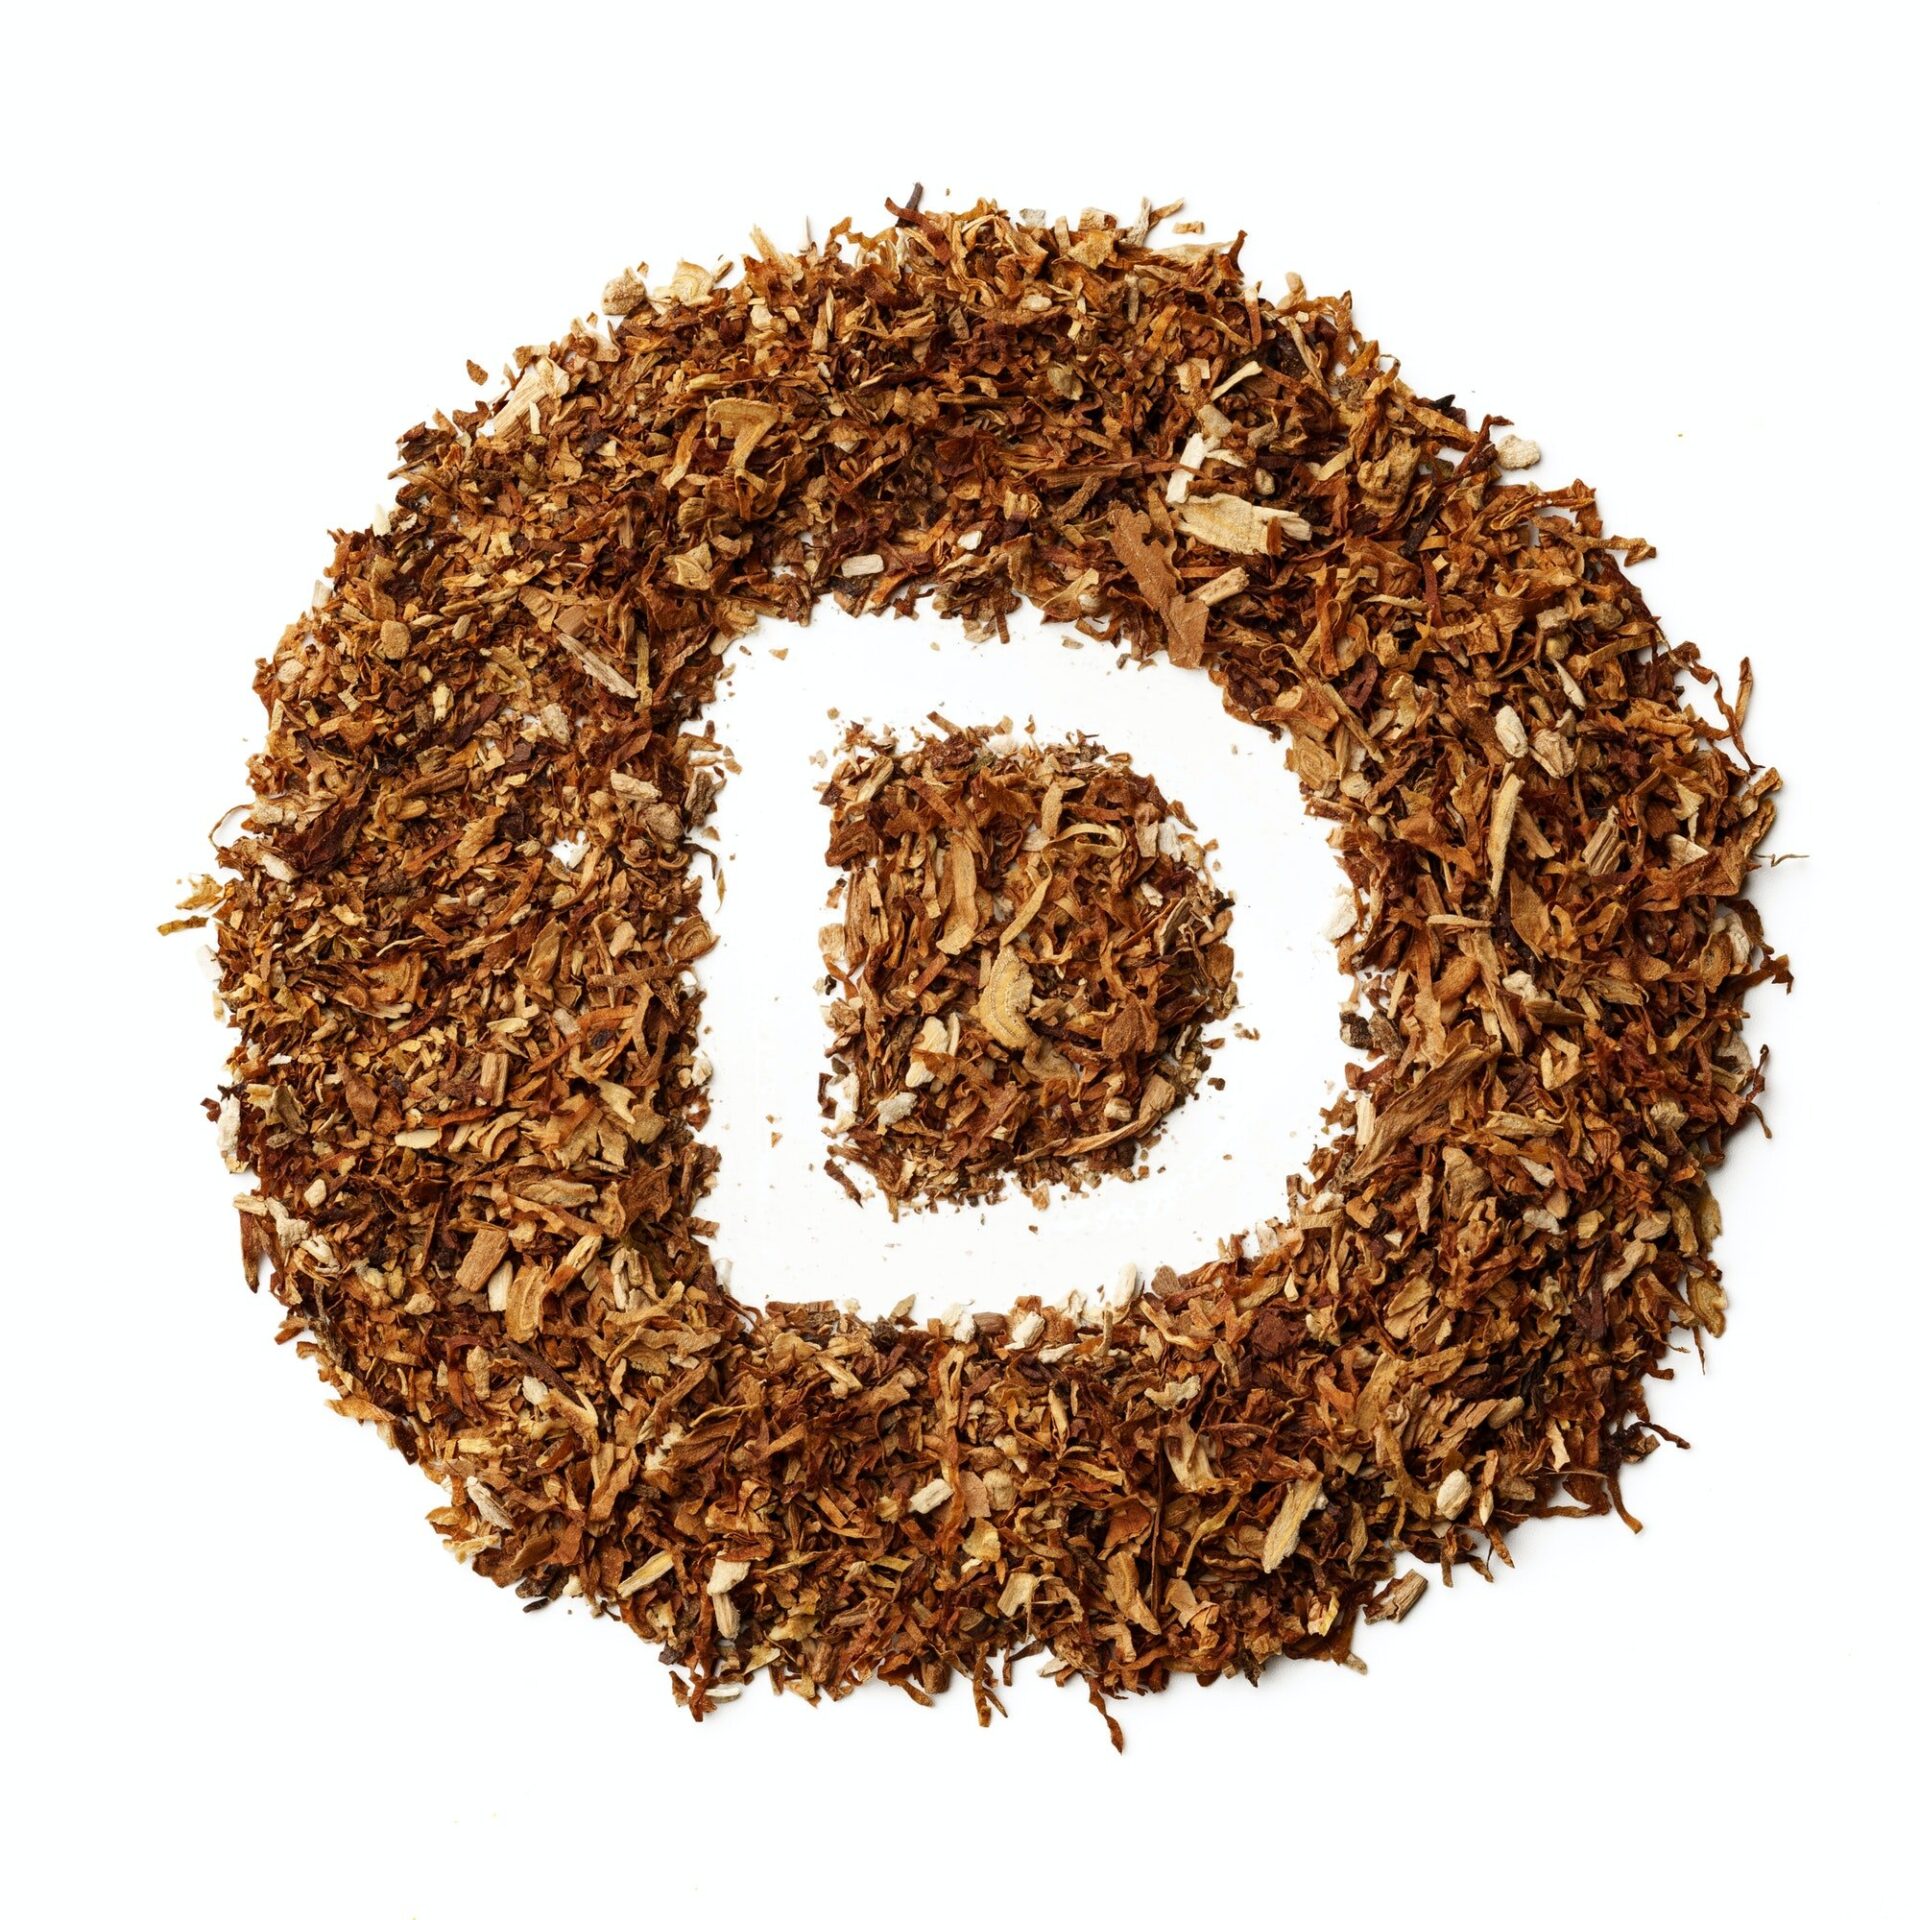 Letter D made of cigarettes dried smoking tobacco on white background